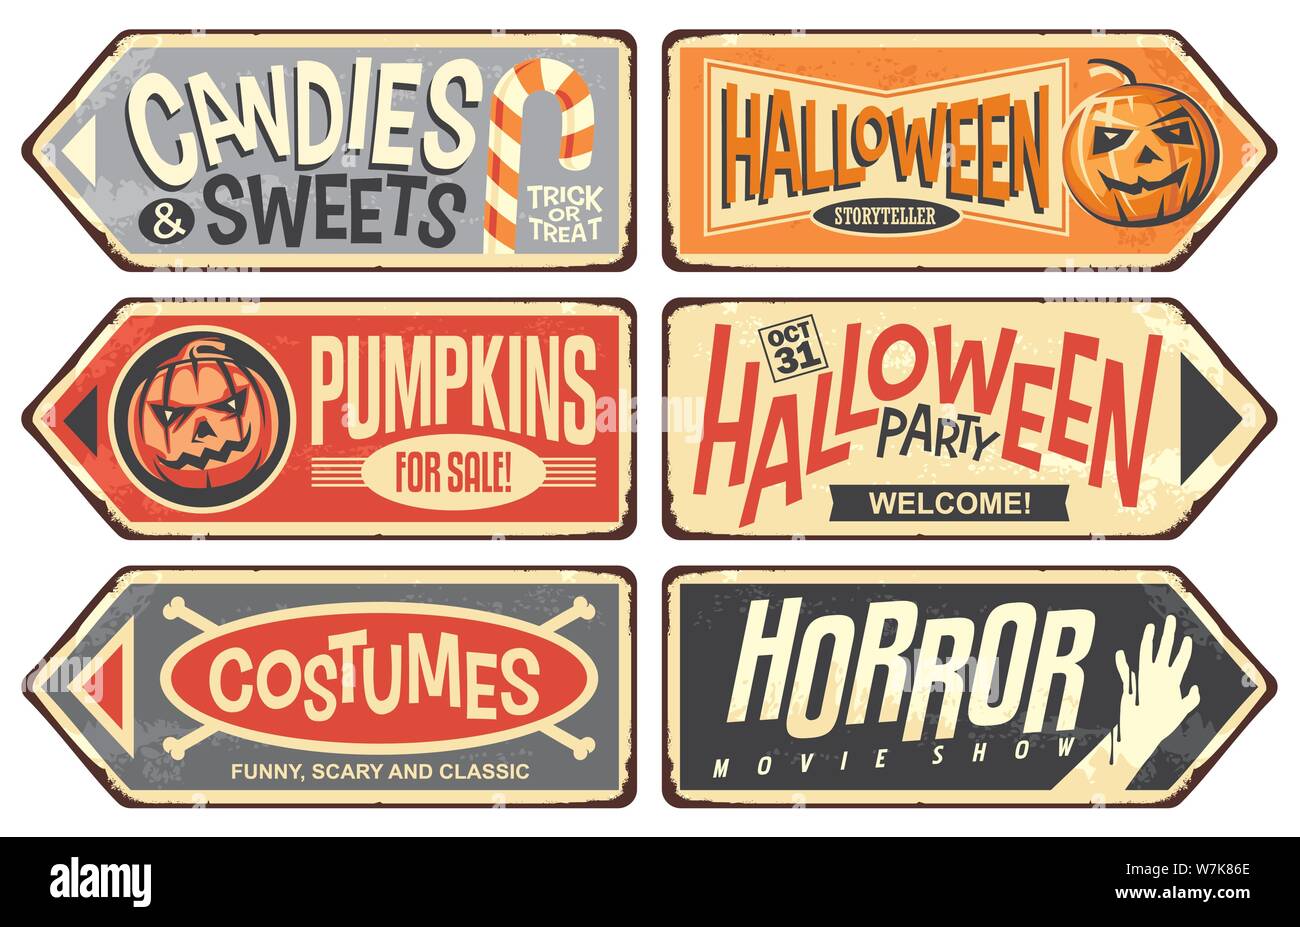 Halloween events retro signs collection. Halloween party, storyteller, horror movie show, pumpkins for sale, costumes, candies and sweets. Stock Vector